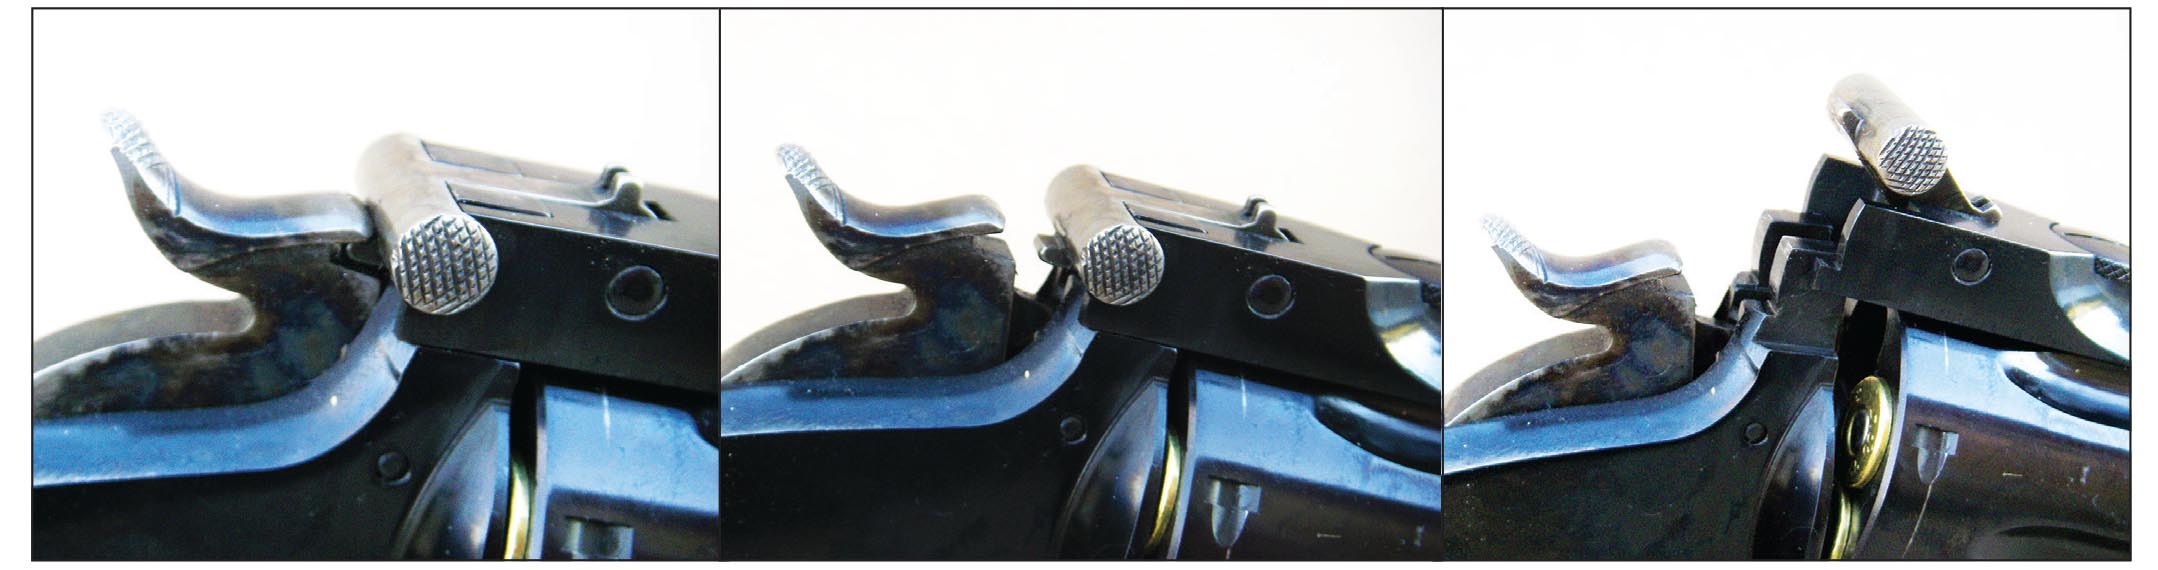 With the hammer in the down position, the action cannot open. With the hammer pulled back to the first notch, the action can be opened to load and unload by pulling the locking latch upward.